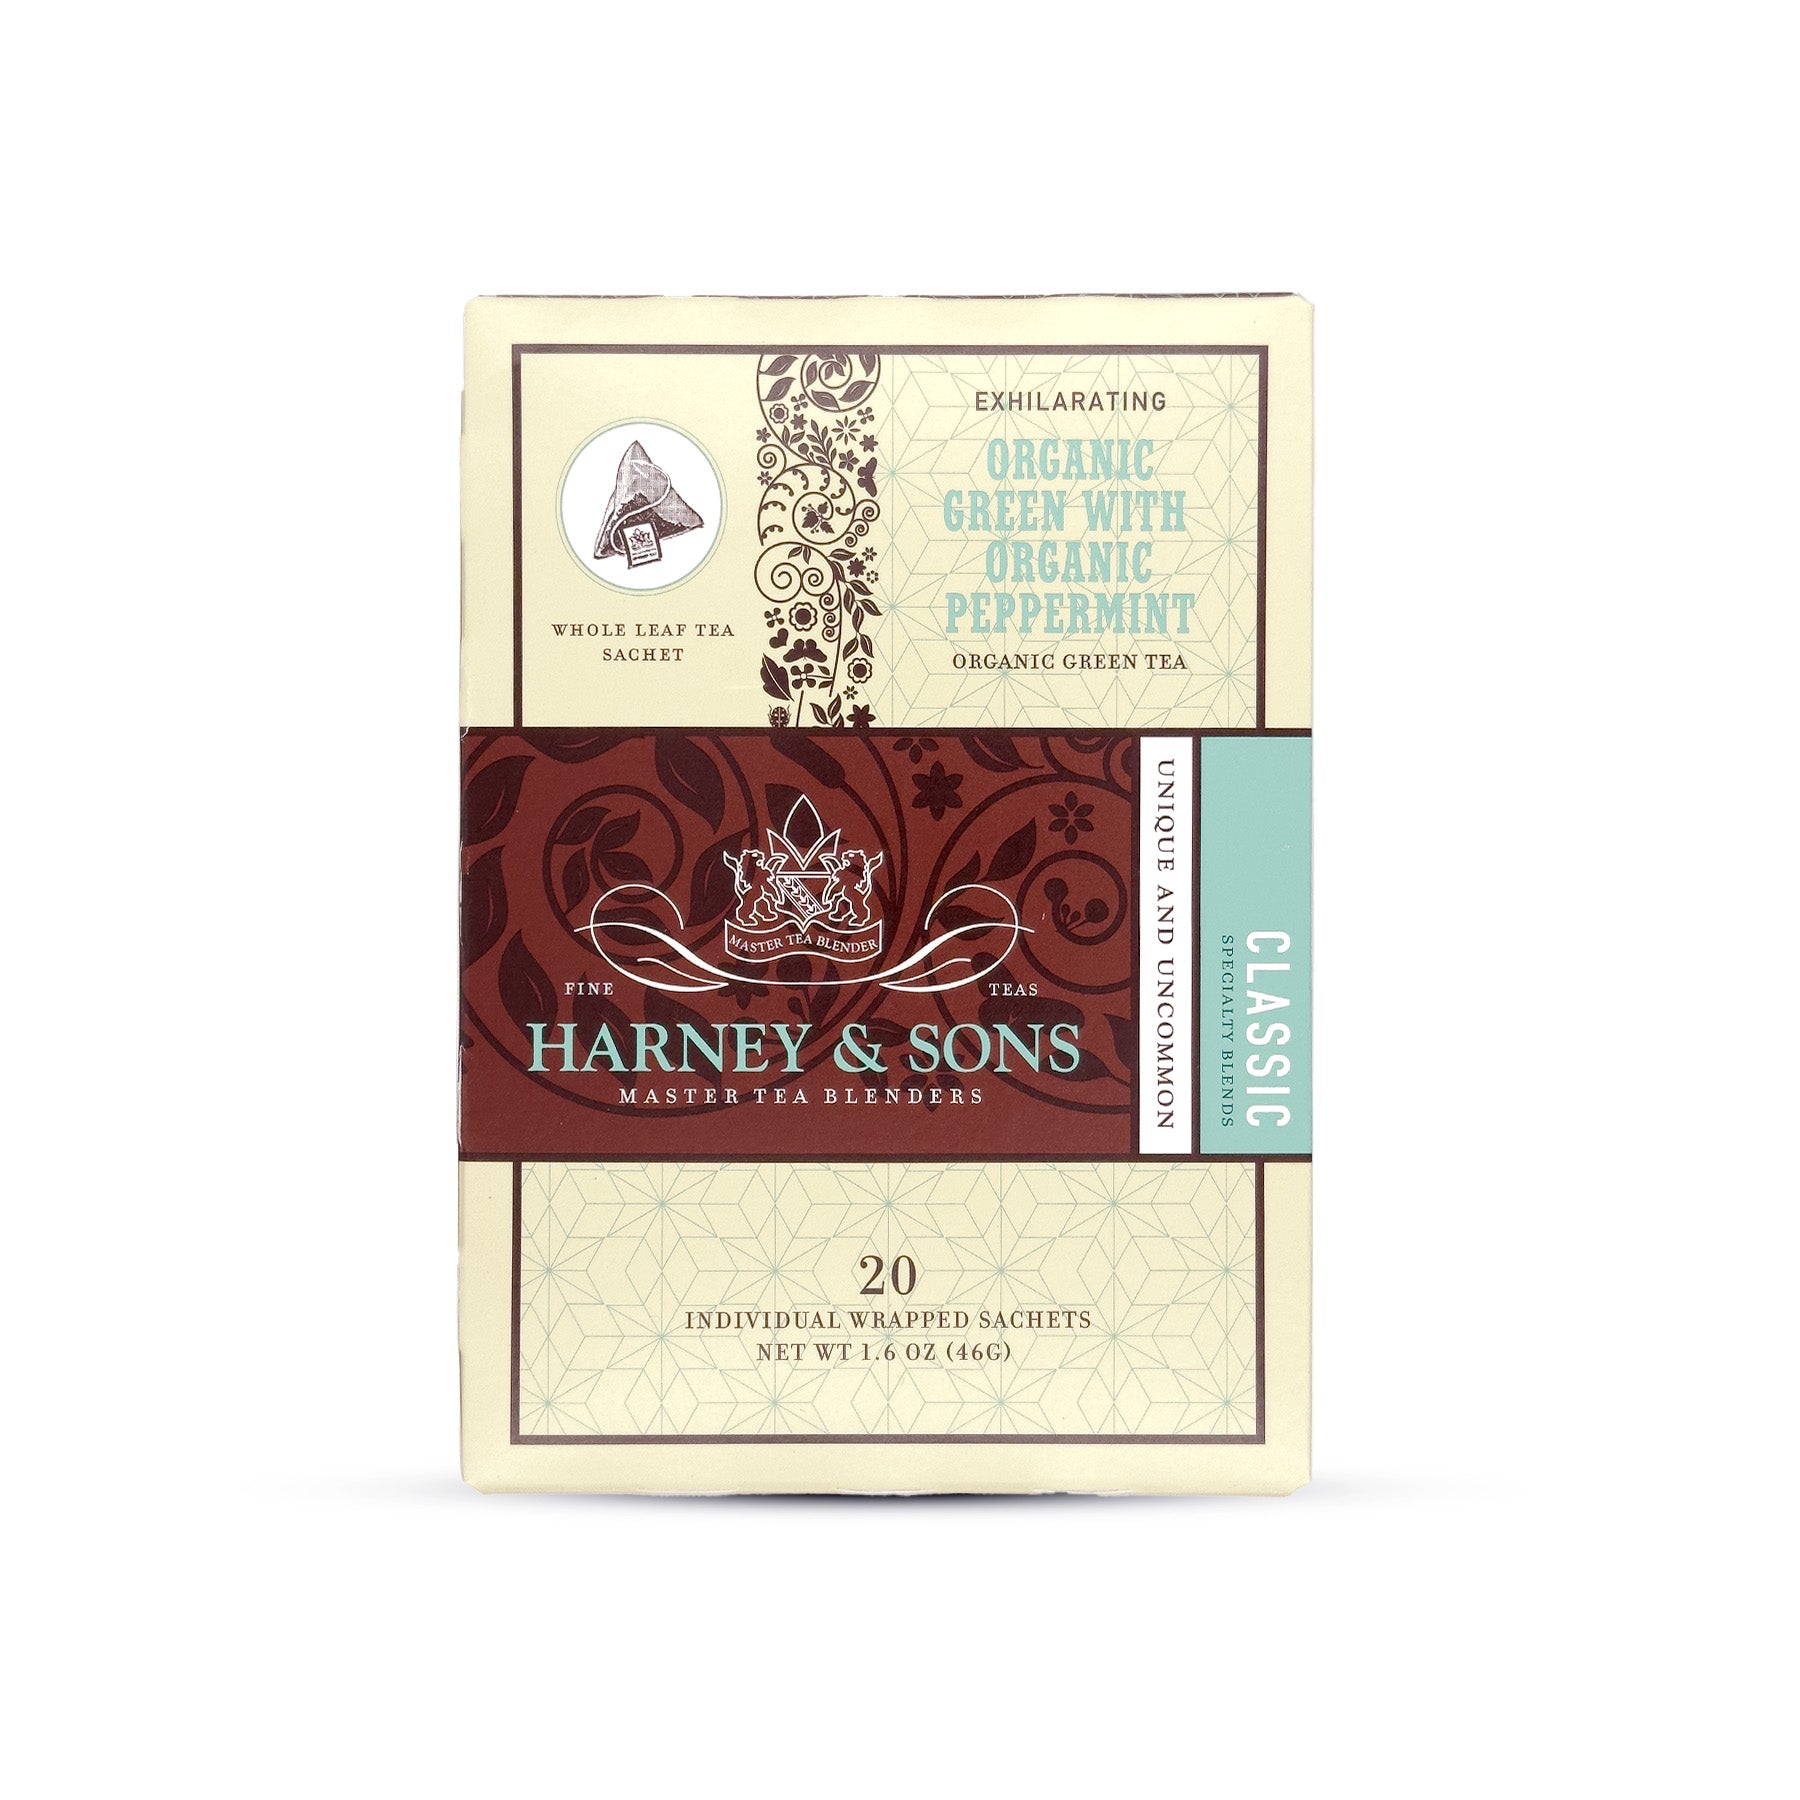 Organic Green Tea with Organic Peppermint, Box of 20 Individually Wrapped Sachets - Harney & Sons Fine Teas Europe